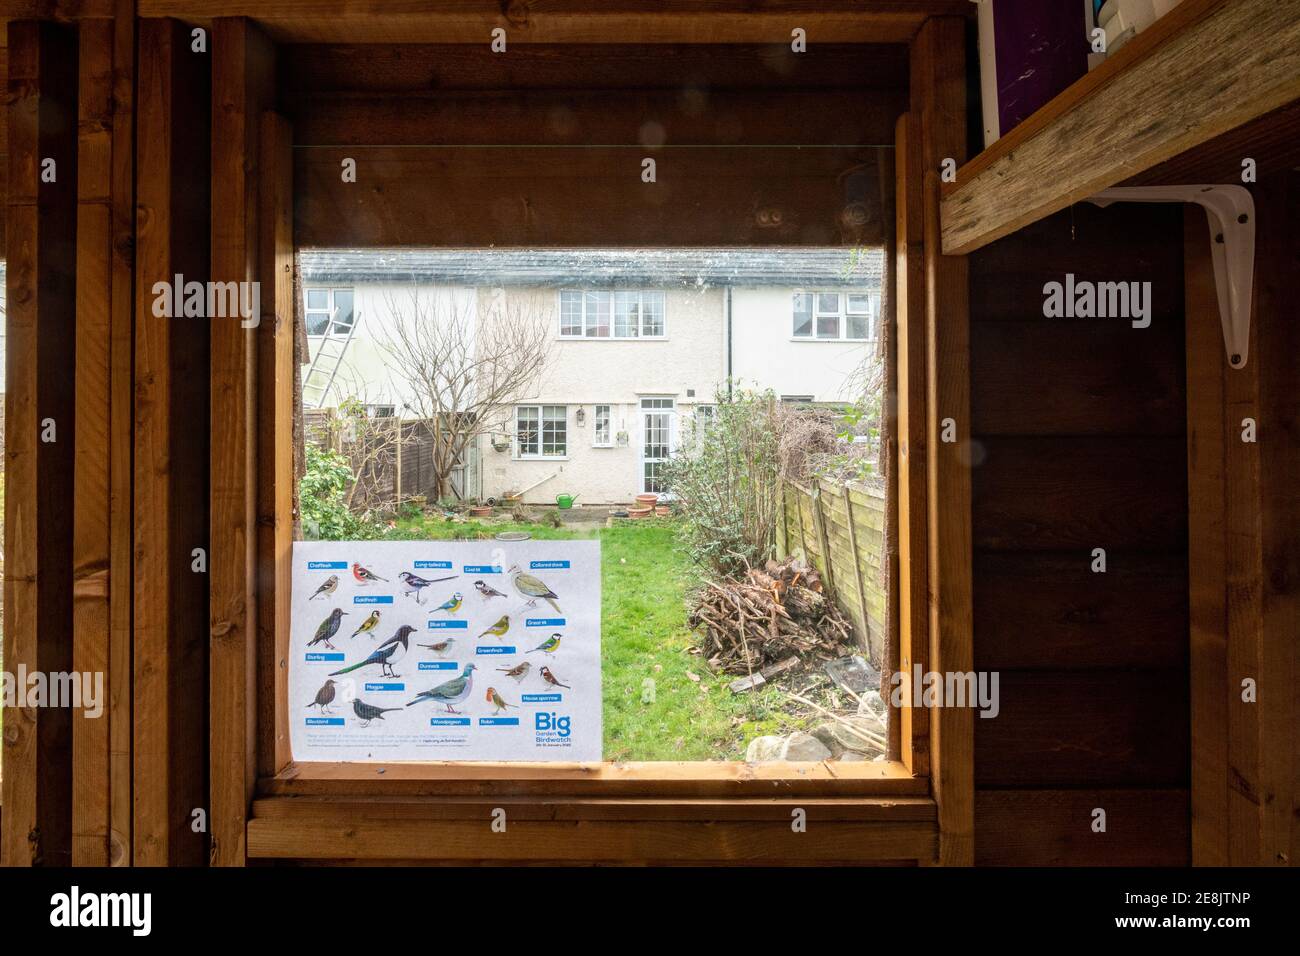 Taking part in the Big Garden Birdwatch with an RSPB bird ID (identification) chart in the garden shed window, UK, January 2021 Stock Photo